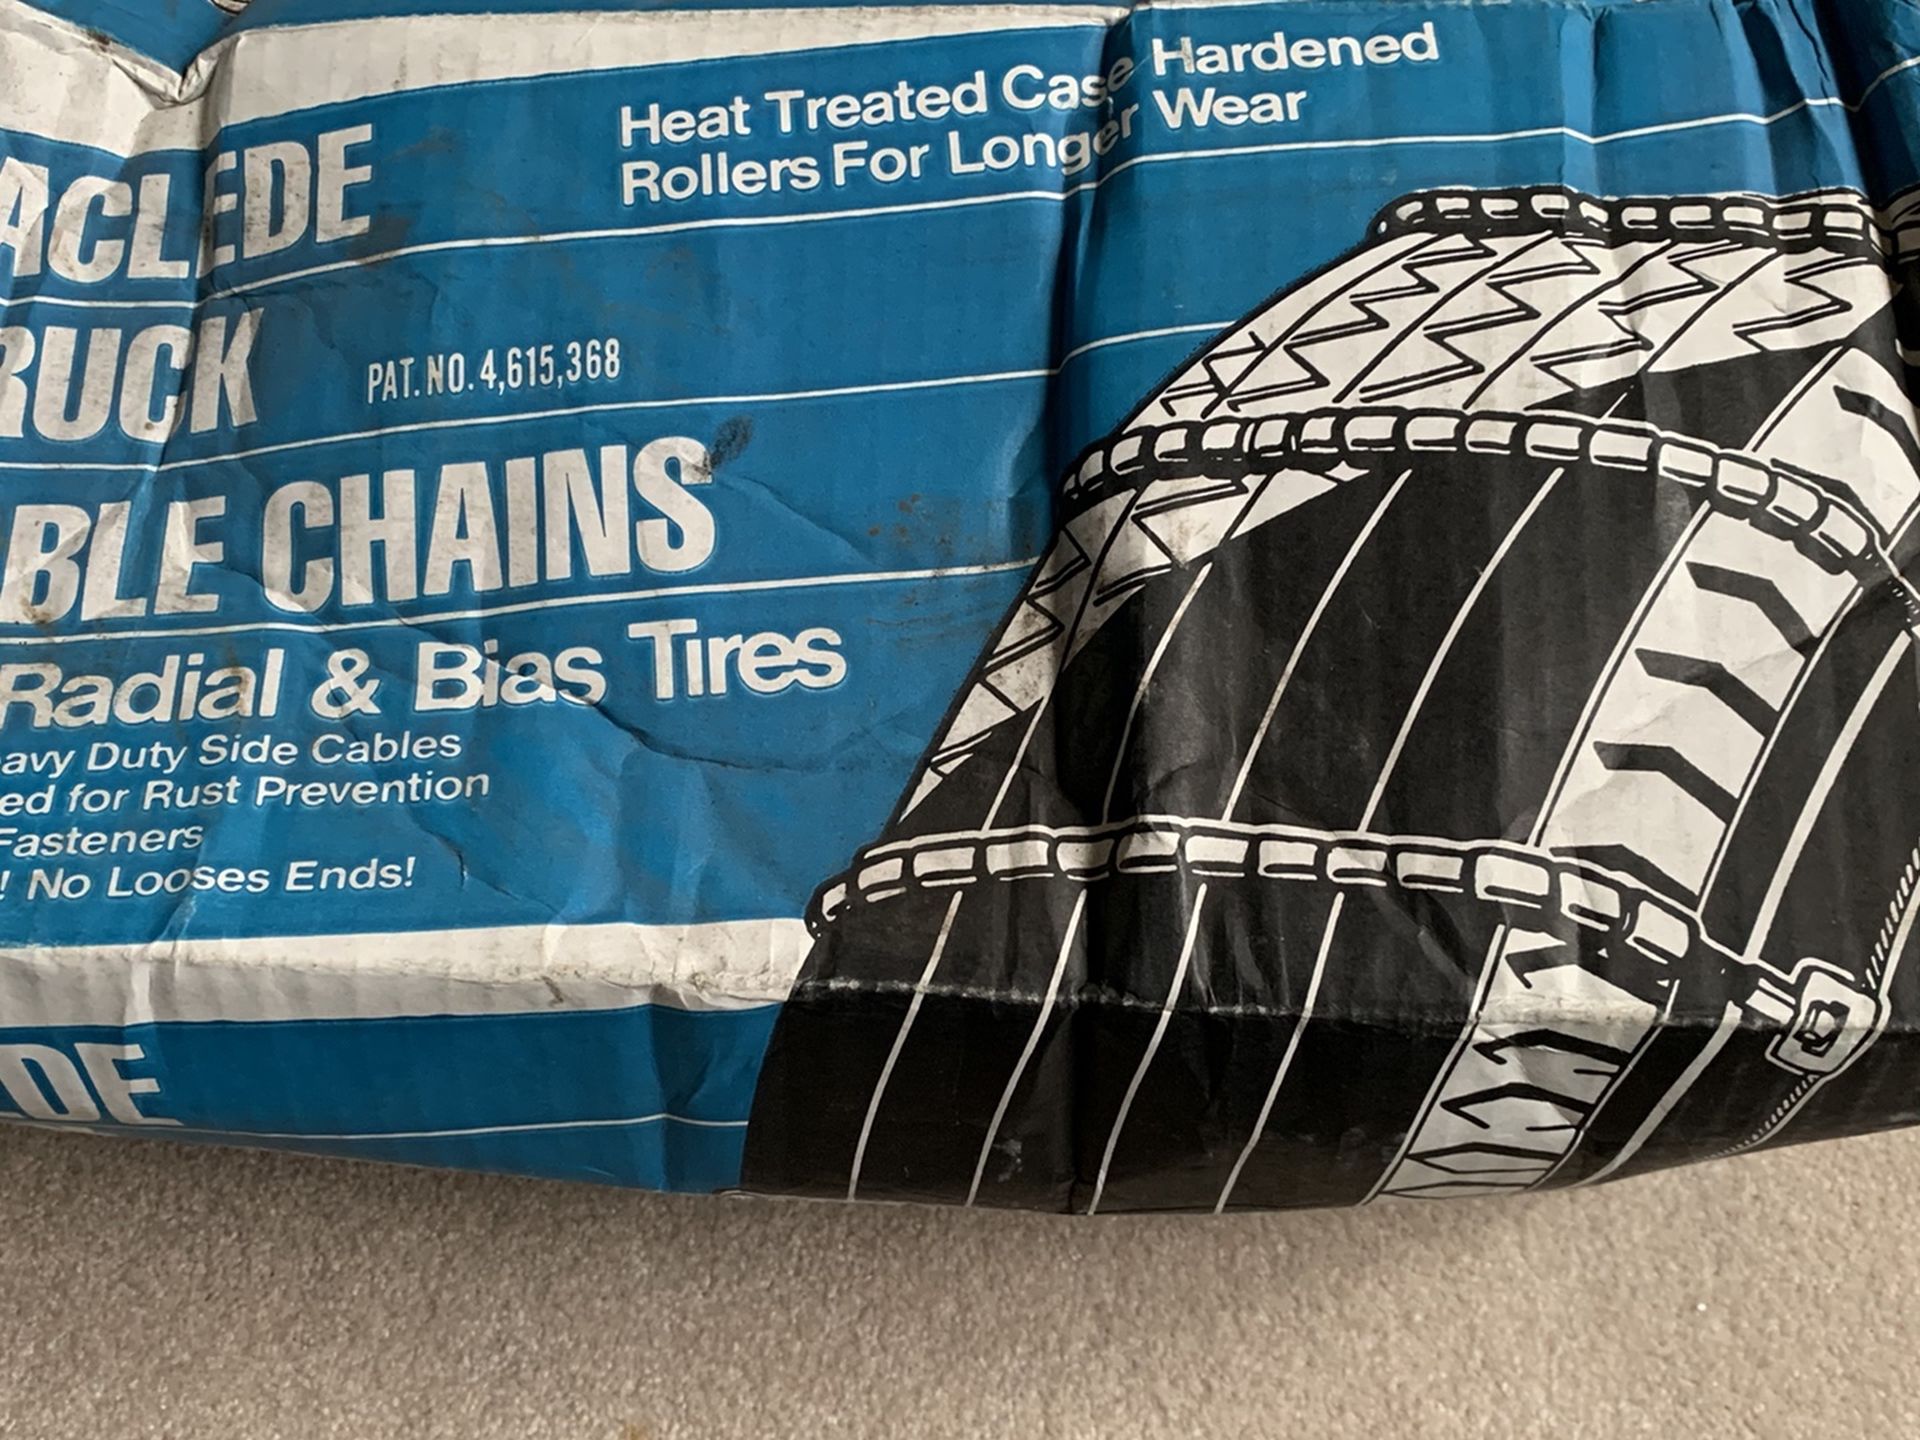 Laclede Truck Motorhome Cable Chains